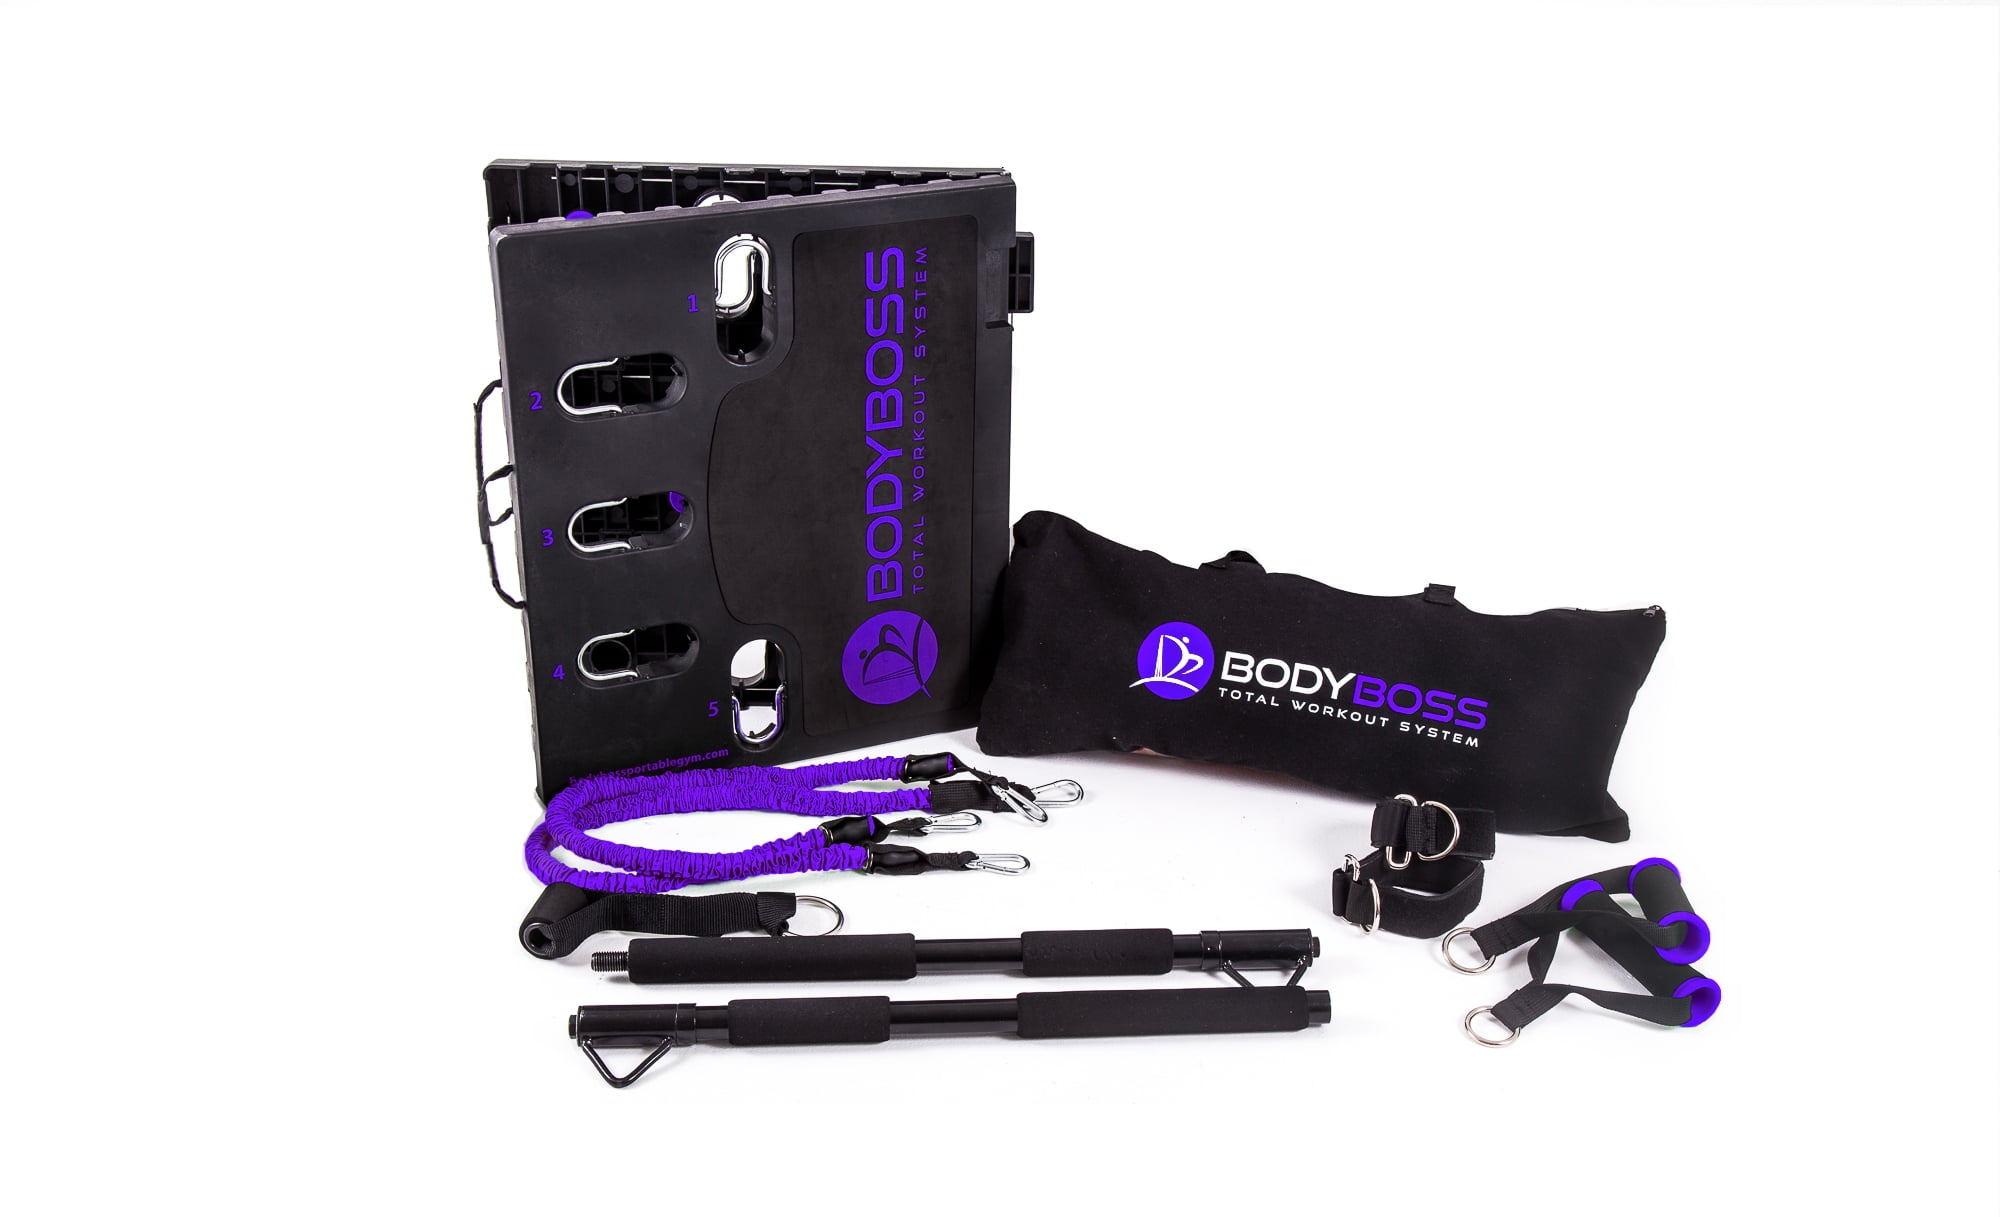 BodyBoss 2.0 - Full Portable Home Gym Workout Package + Resistance Bands -  Collapsible Resistance Bar, Handles - Full Body Workouts for Home, Travel  or Outside - Compleo Waco, LLC